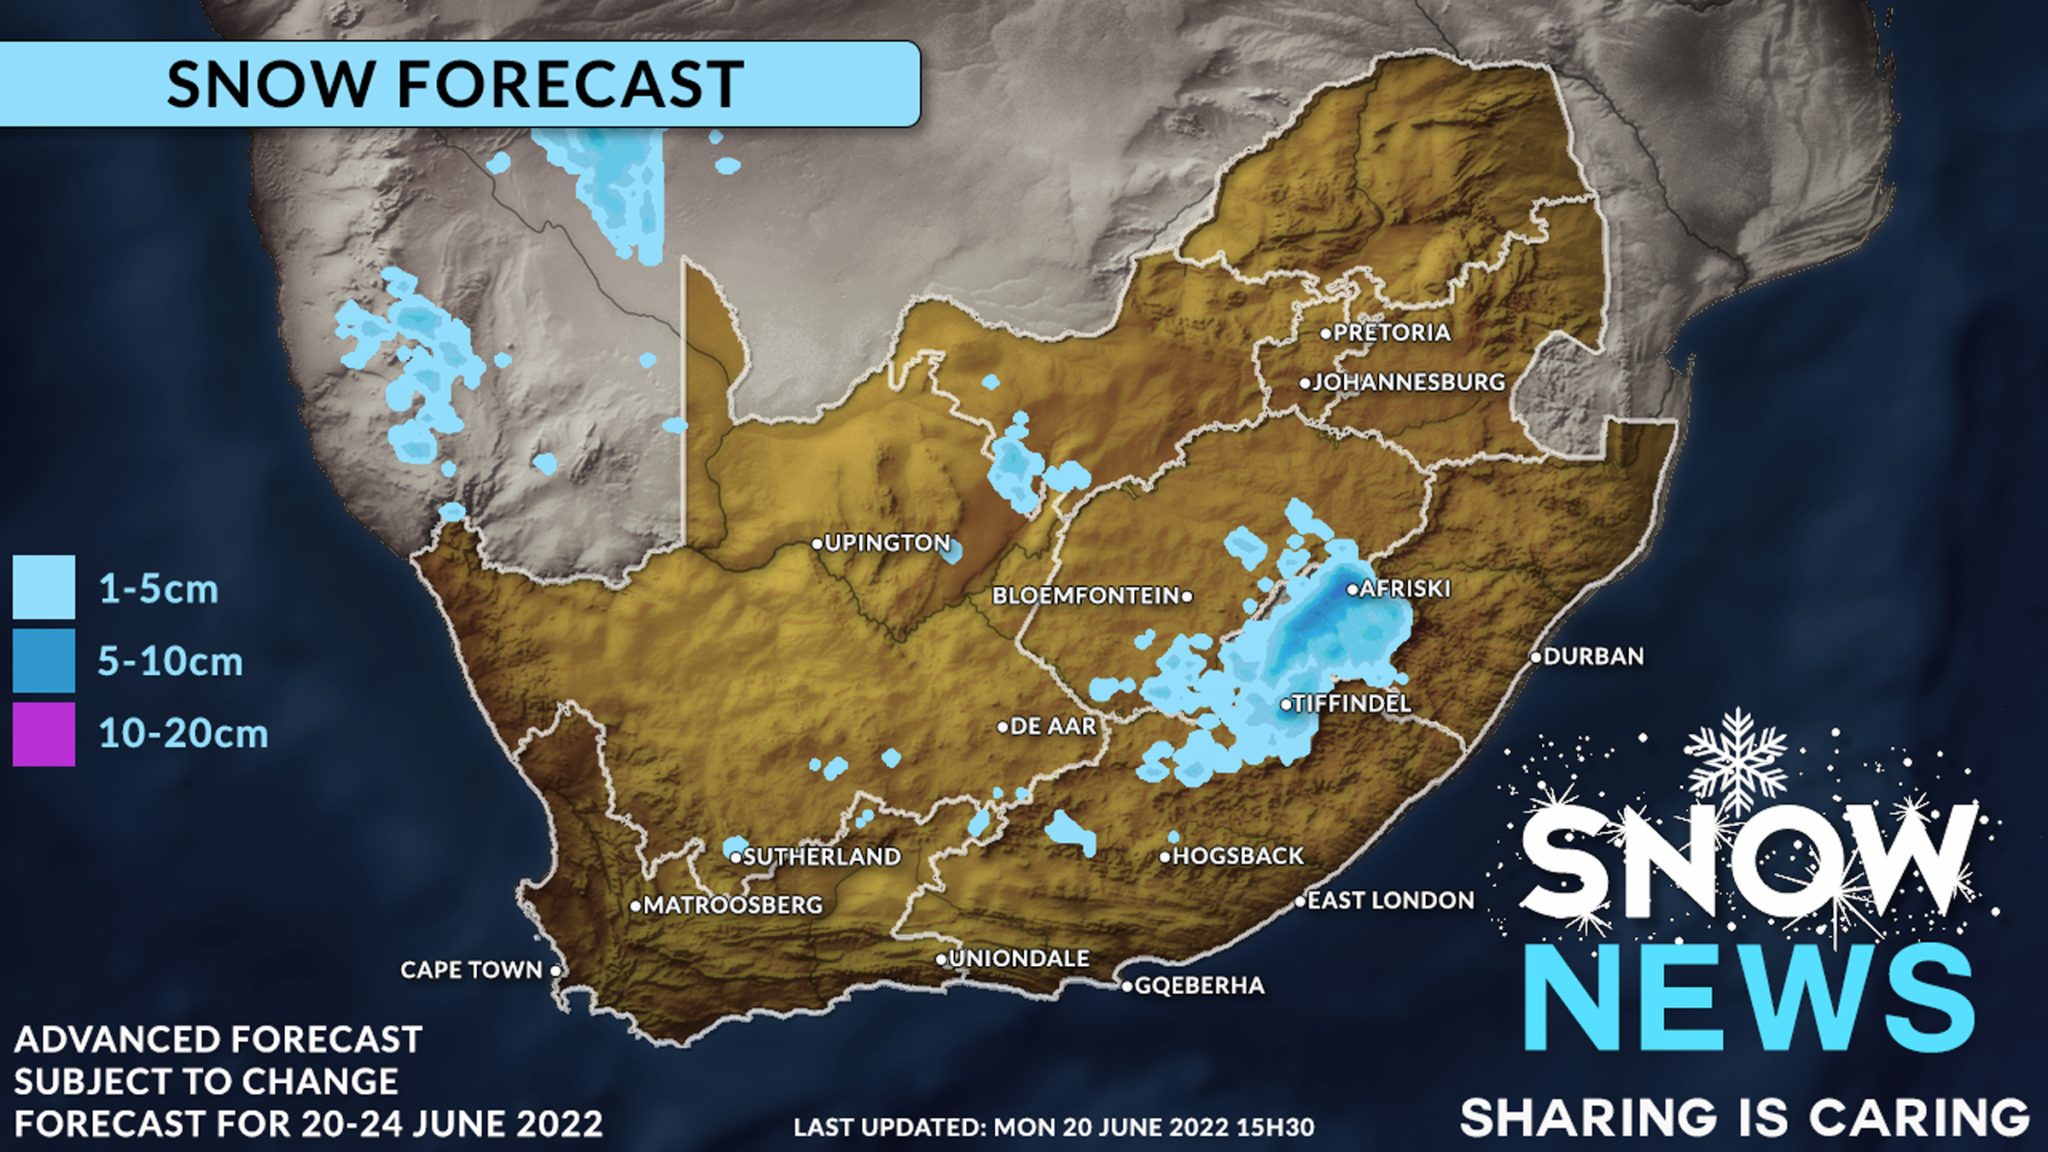 Namibia and parts of South Africa likely to see some snow Snow